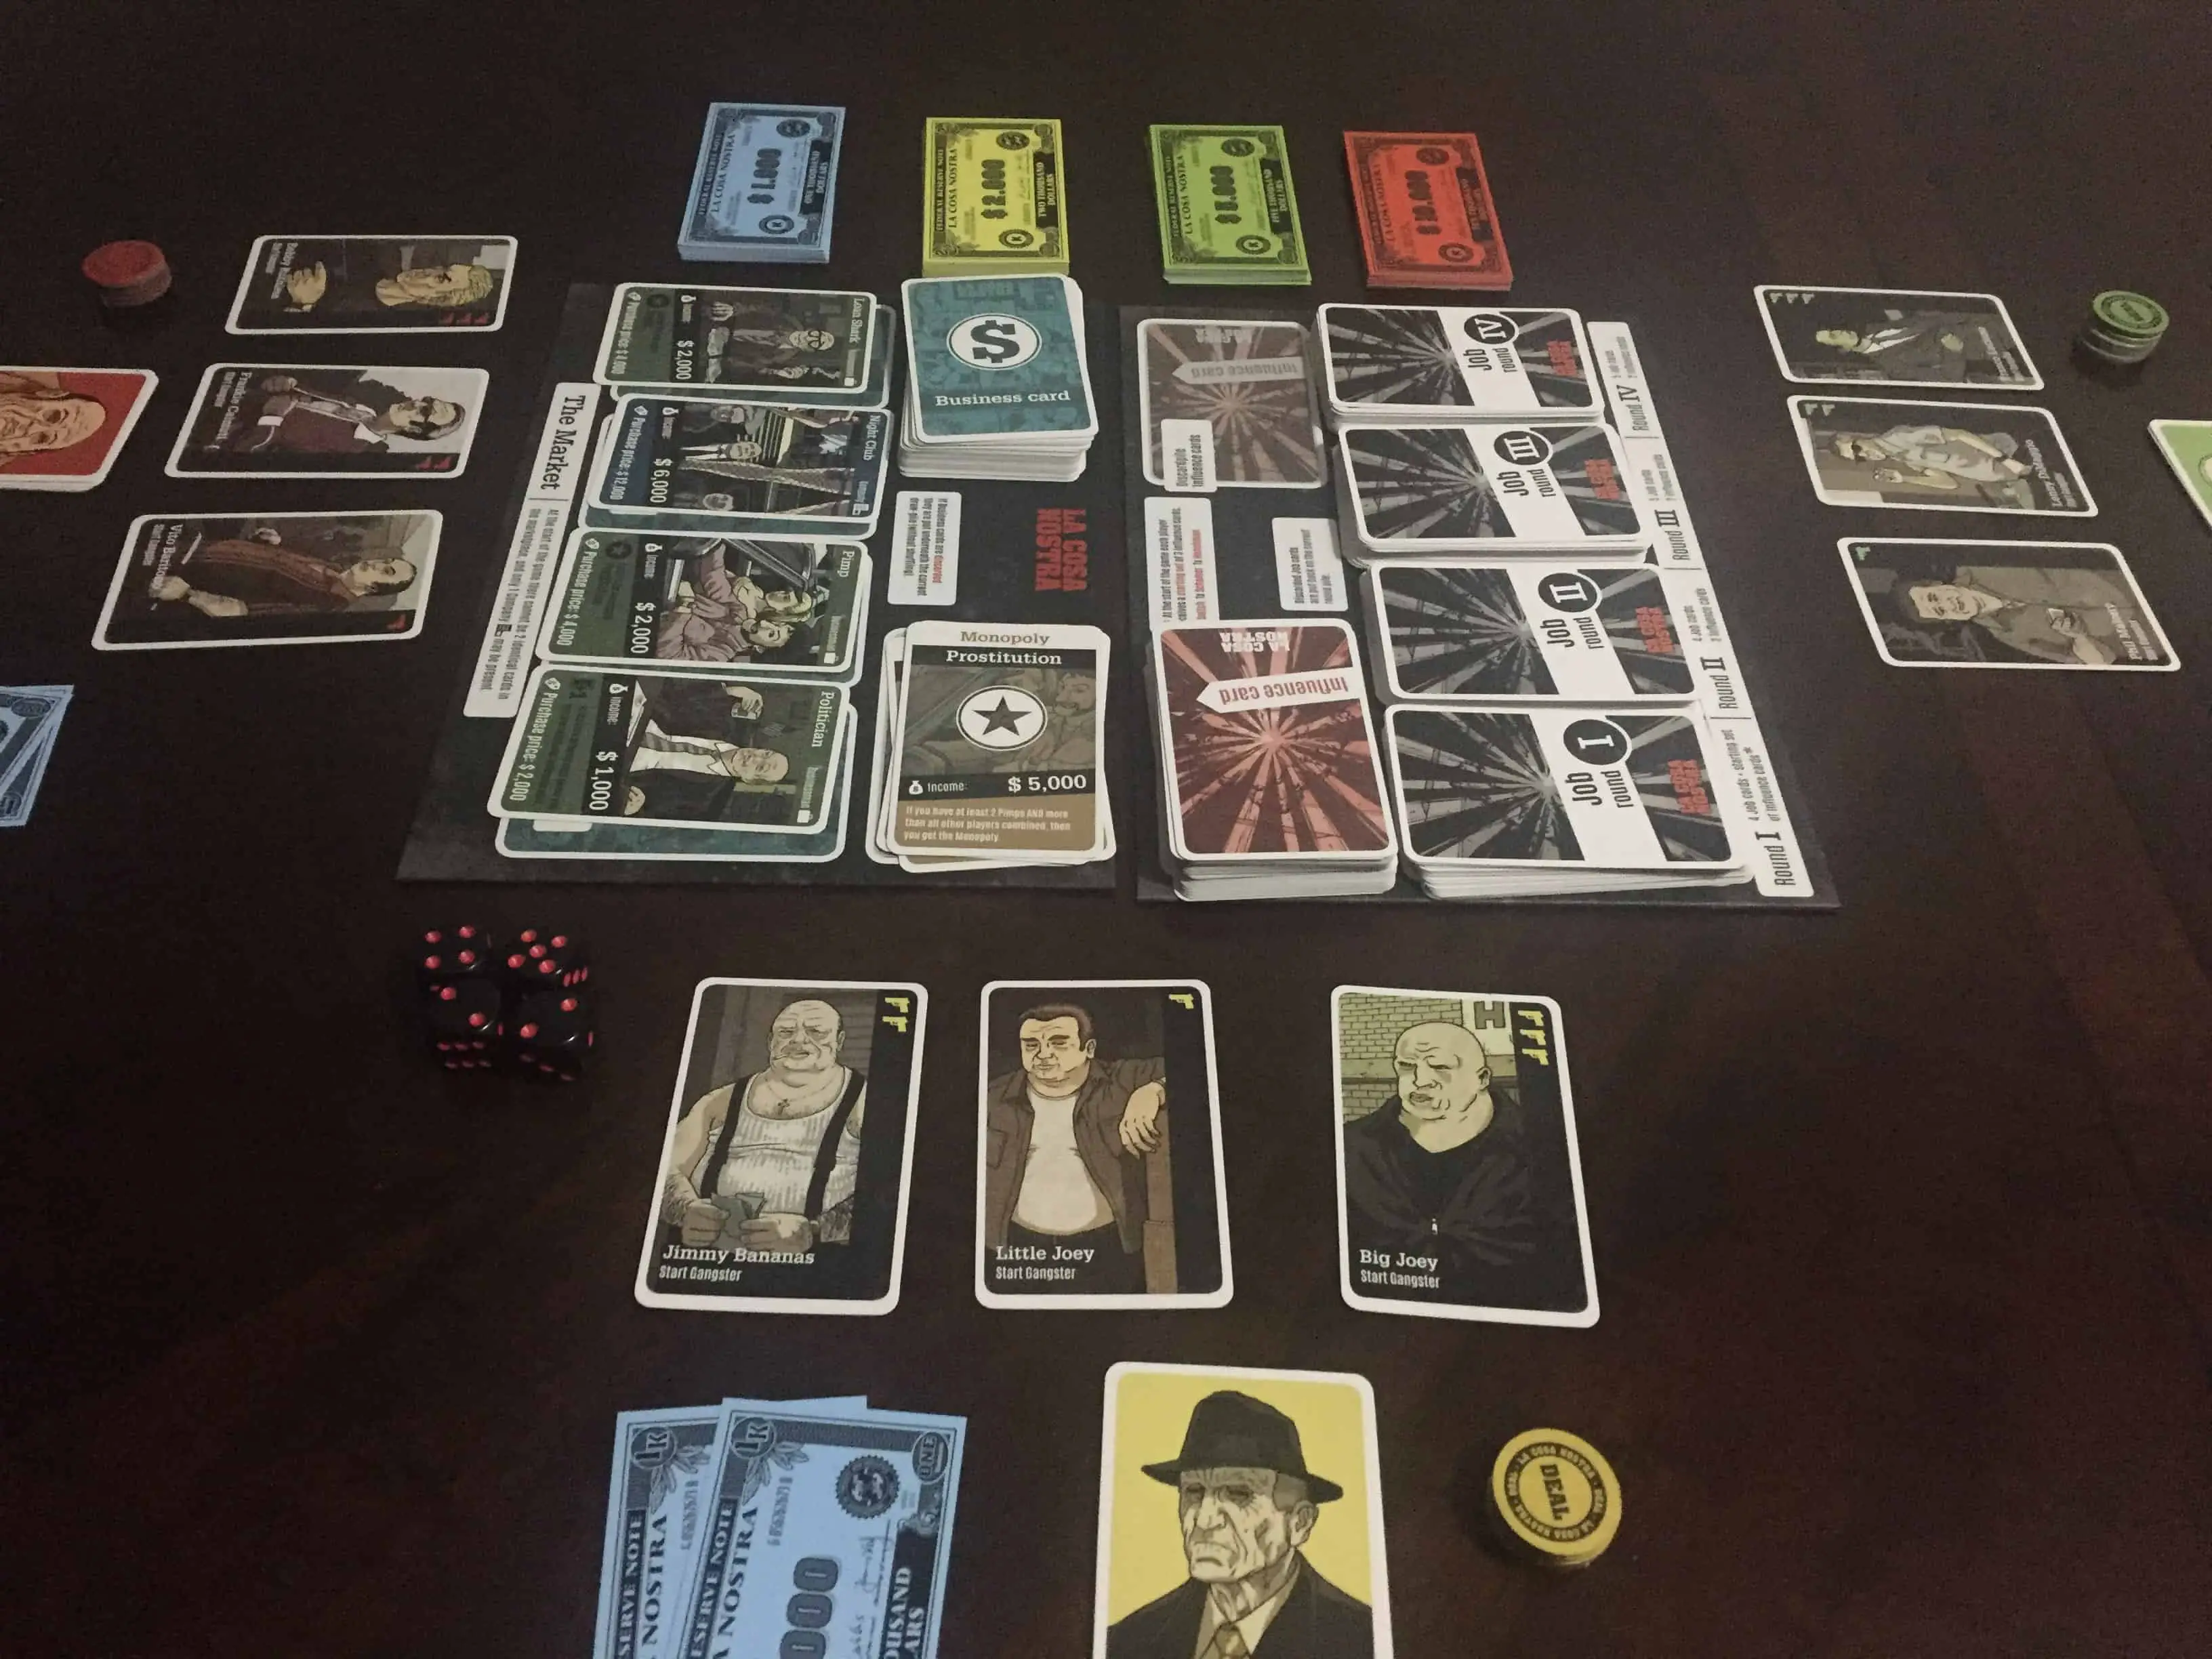 La Cosa Nostra Review - Board Gamers Anonymous